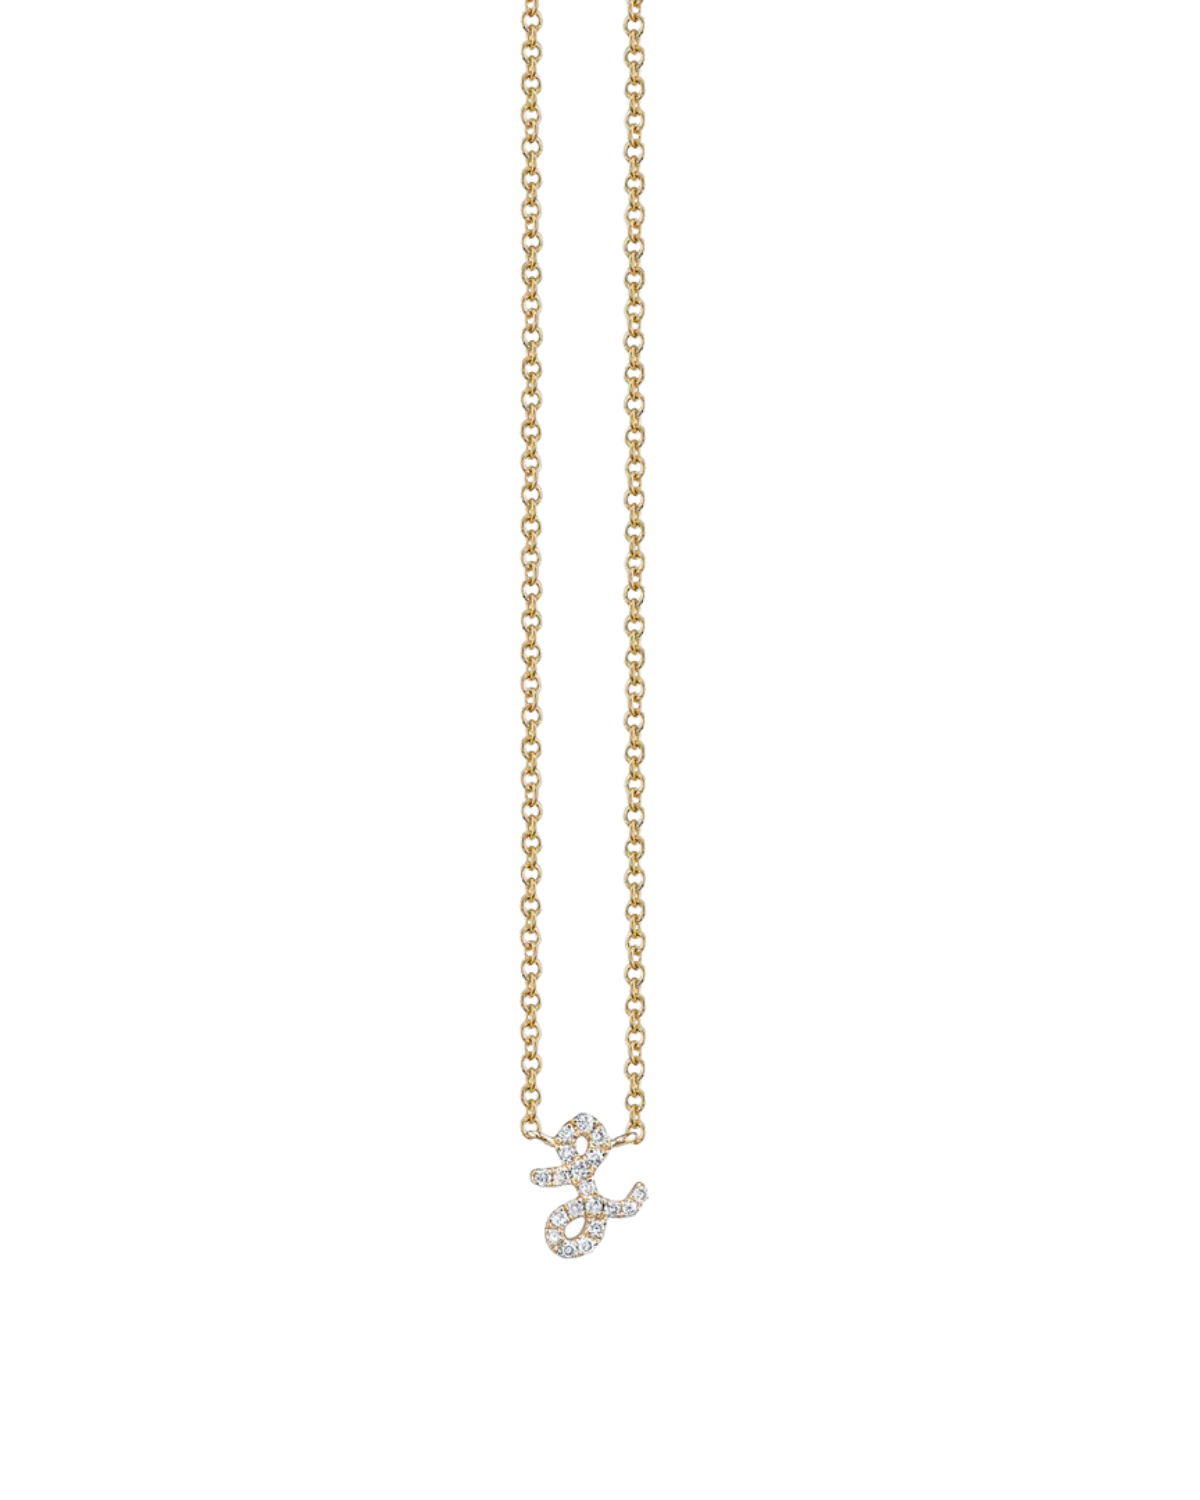 L Initial Necklace (Yellow Gold)